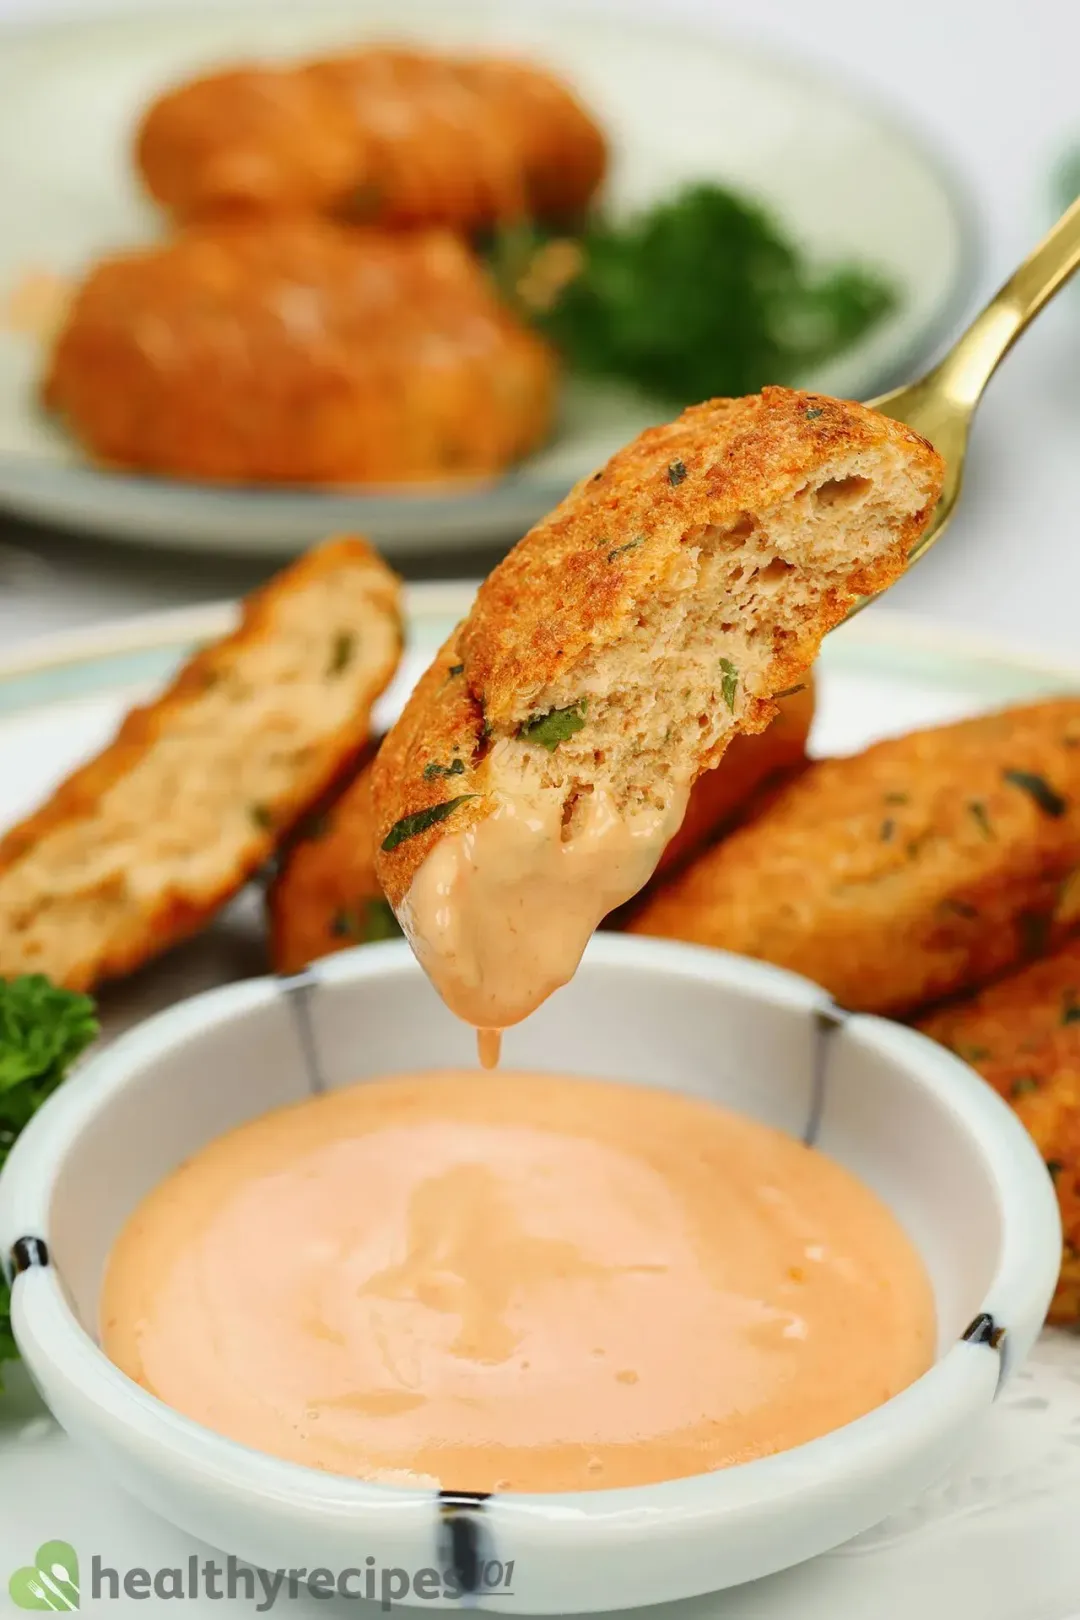 A close up picture of a piece of air fryer salmon patty dipped in a orange-colored sauce in the background of a plate with other patties.